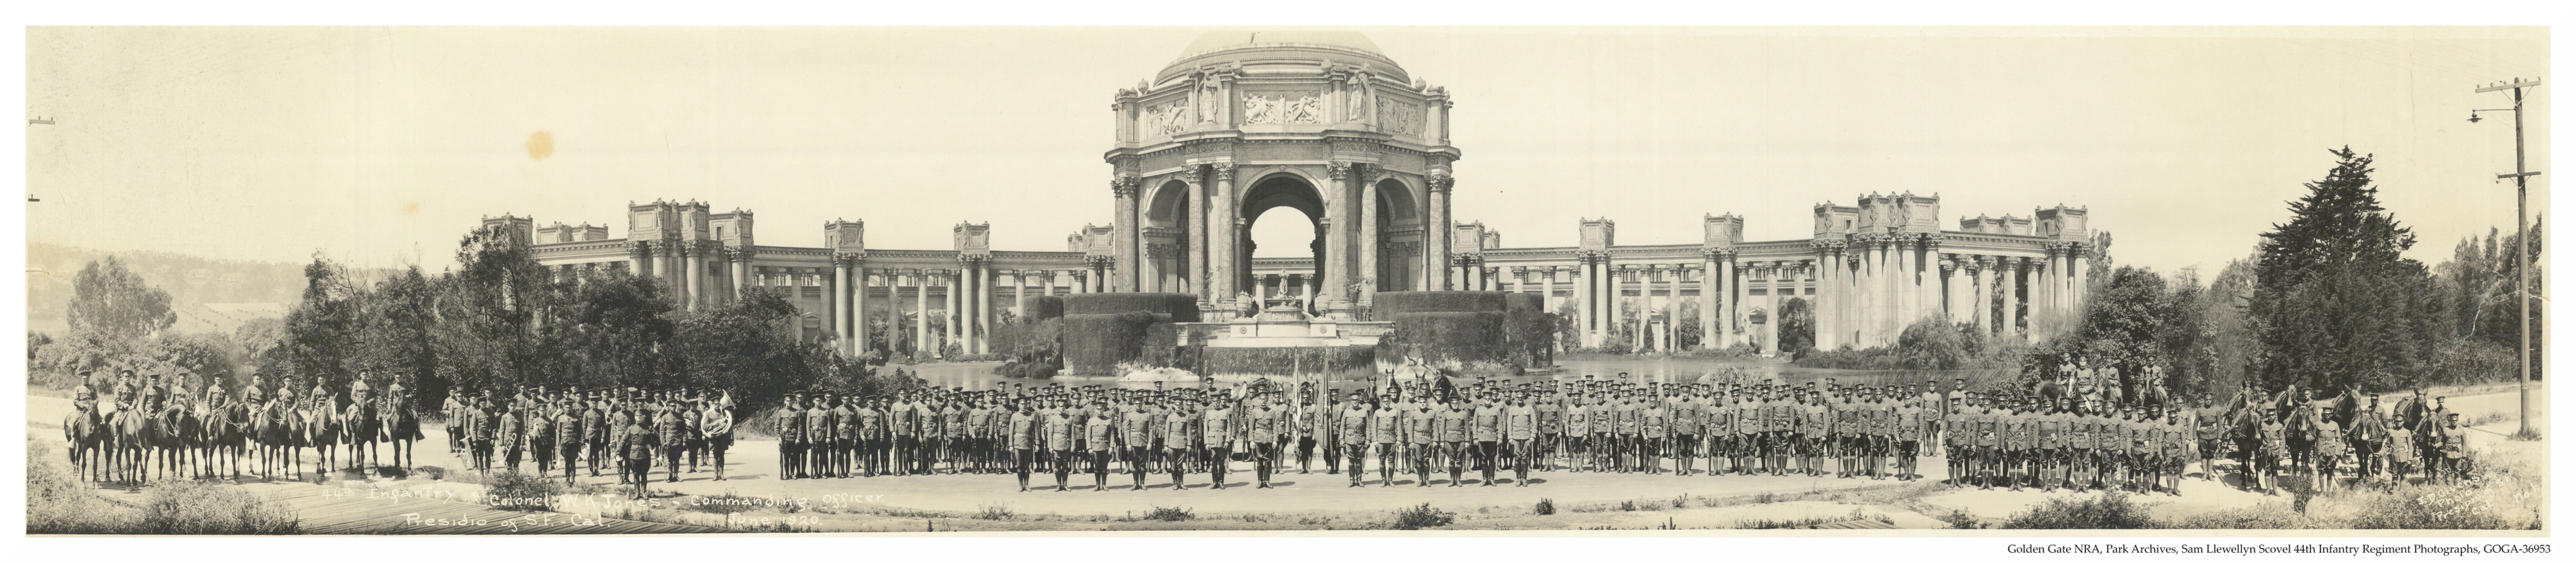 44th infantry taken in front of the Palace of Fine Arts in 1920 